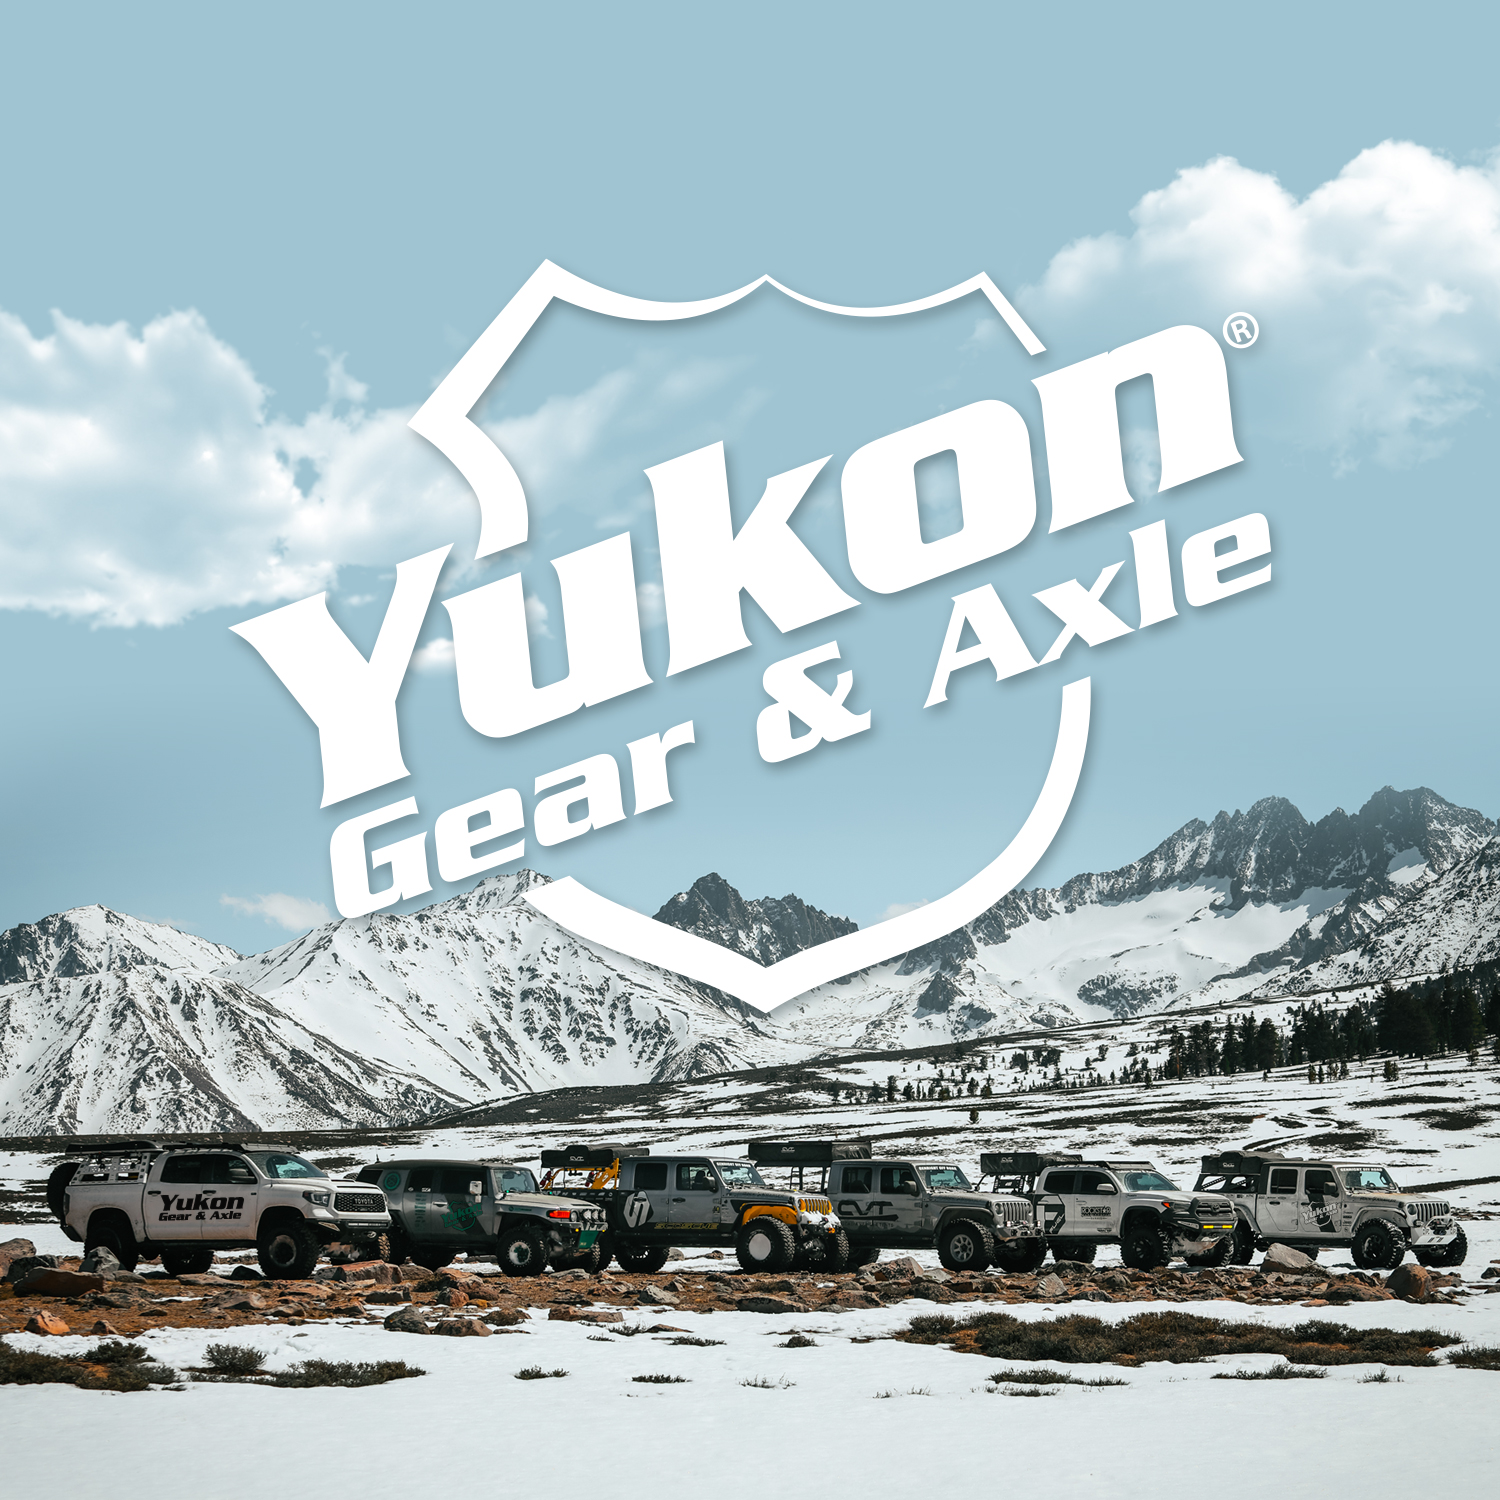 High performance Yukon Ring & Pinion gear set for Model 20 in a 4.11 ratio 